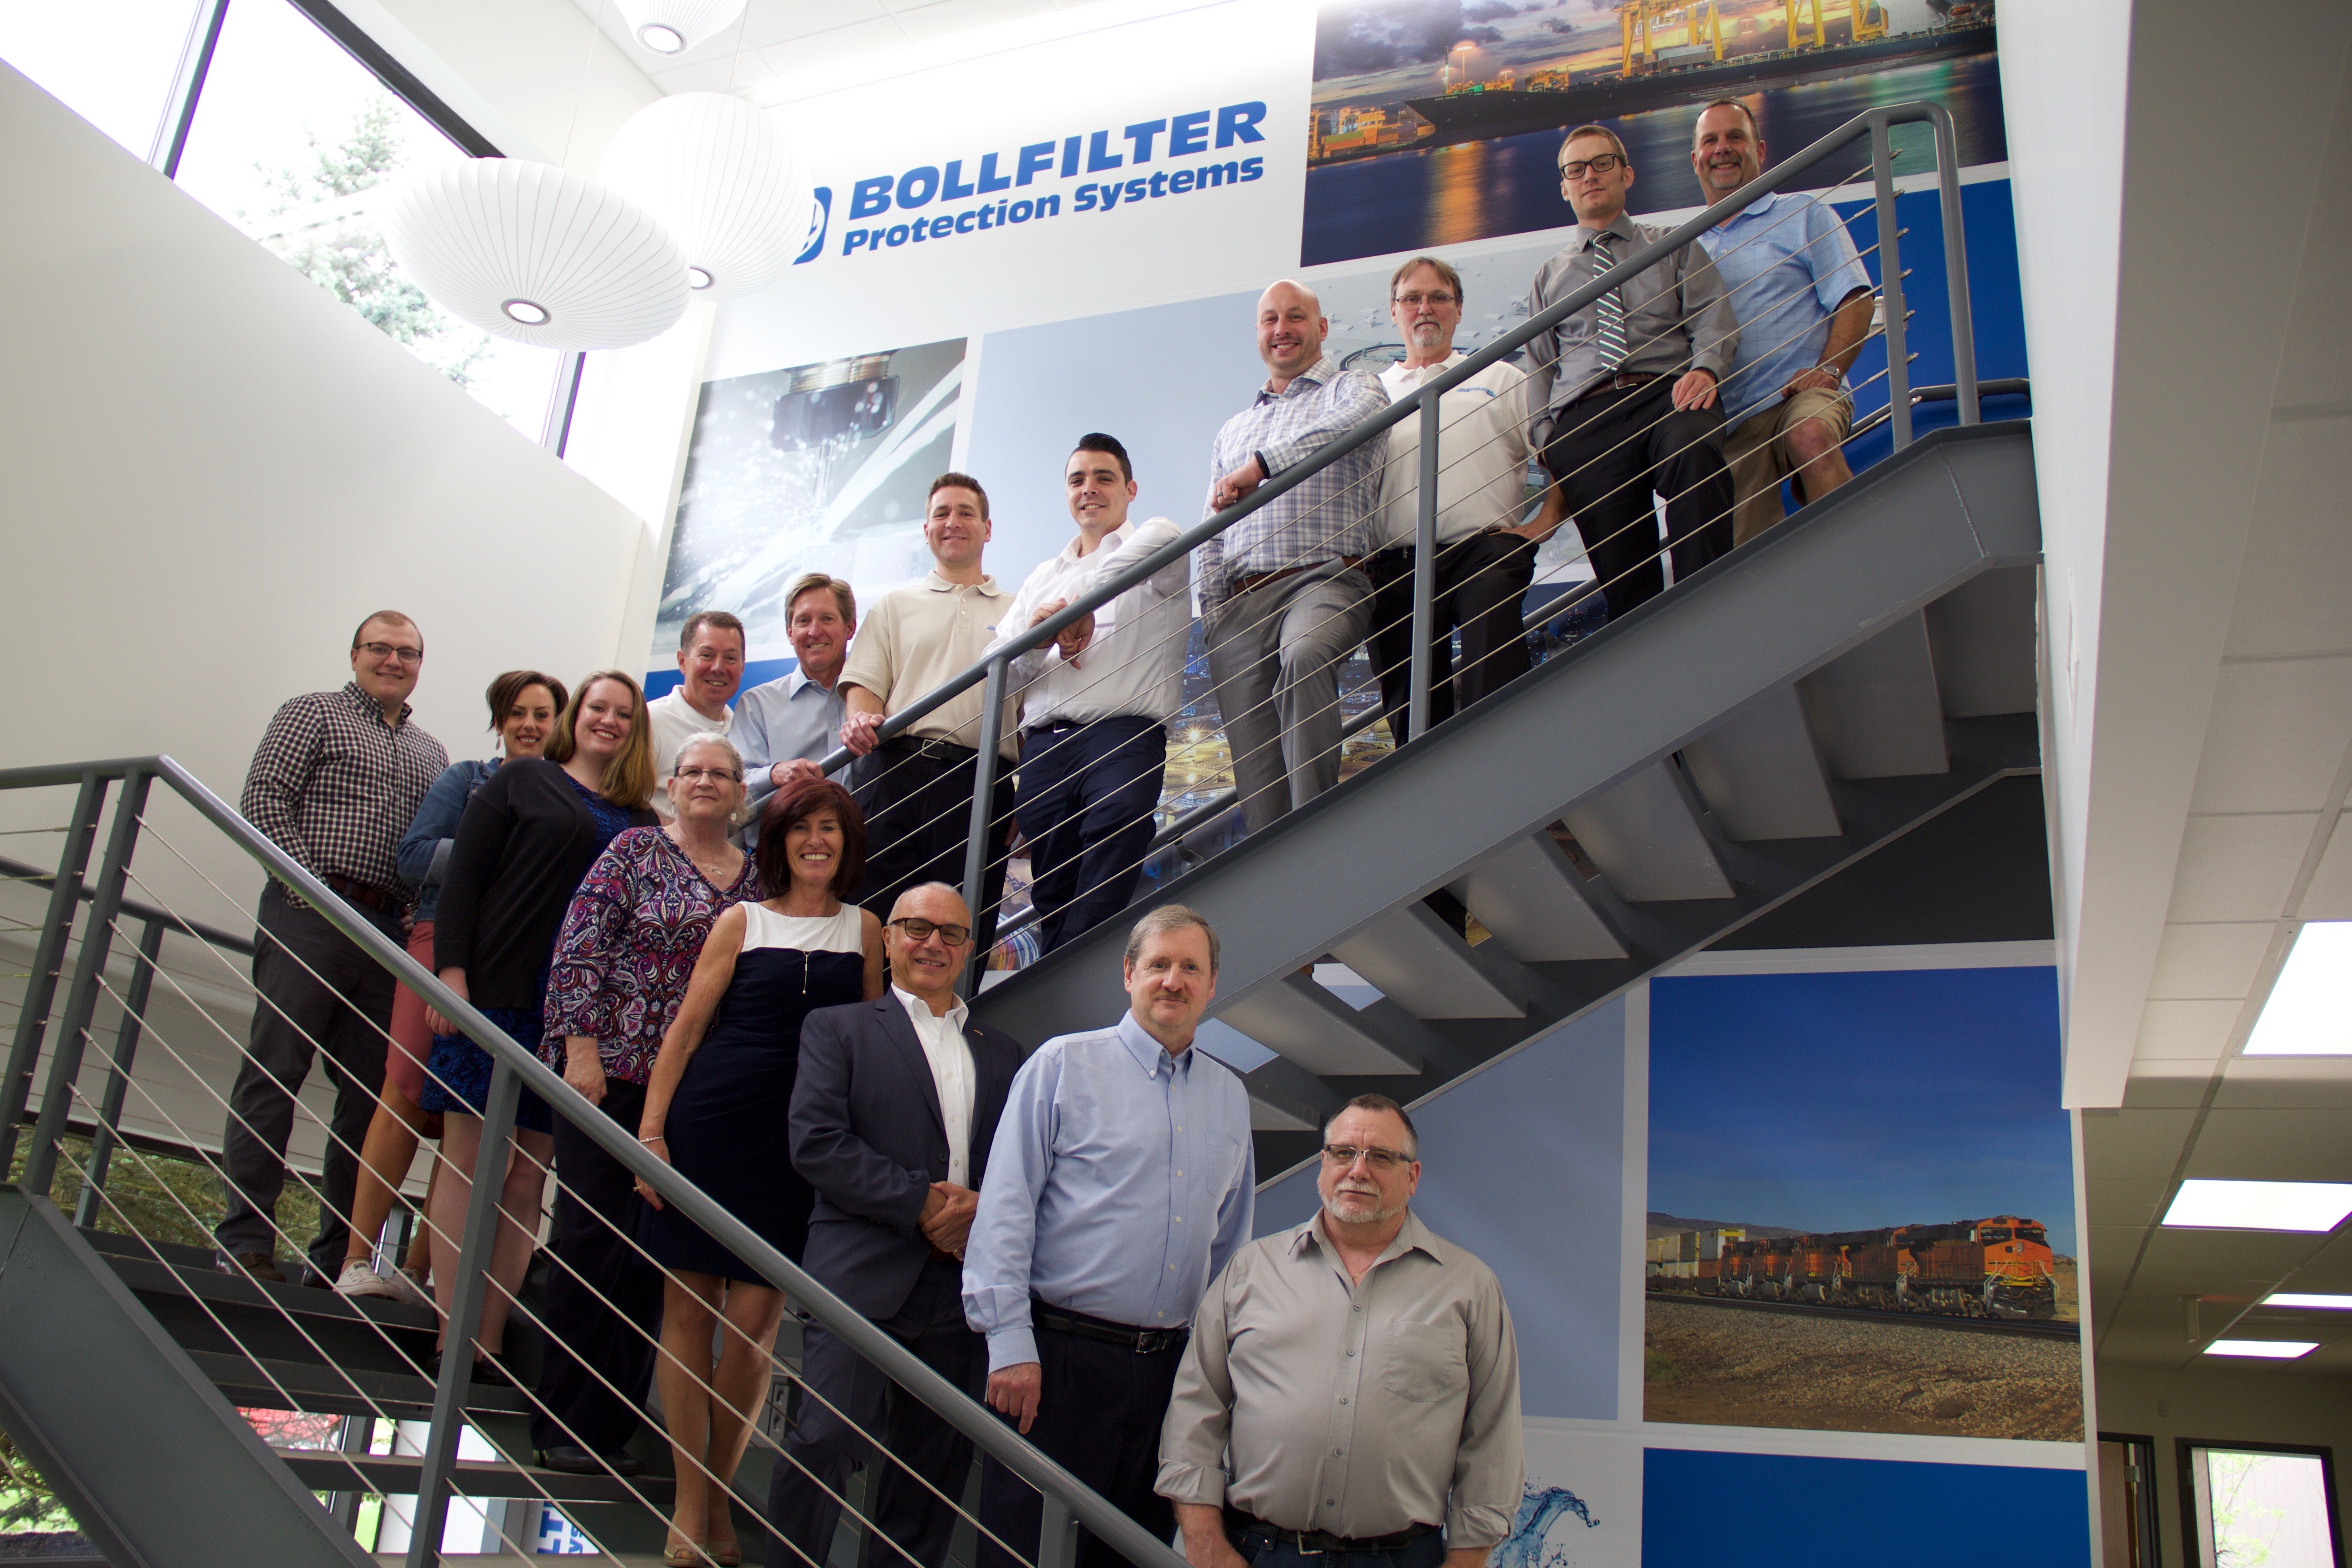 Boll Filter Corporation employees in the USA